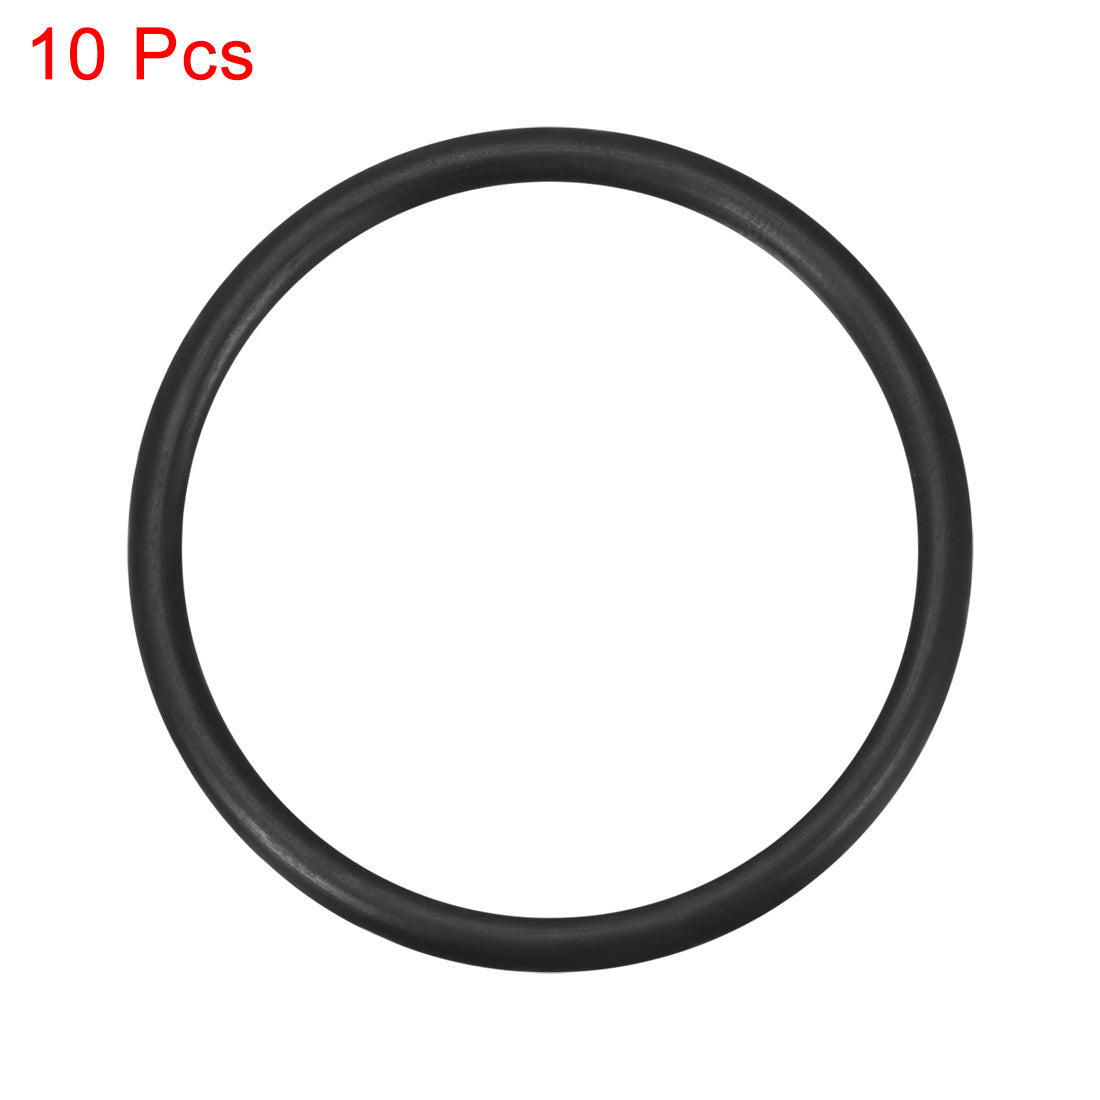 uxcell Uxcell O-Rings Nitrile Rubber 26.5mm x 31.8mm x 2.65mm Seal Rings Sealing Gasket 10pcs